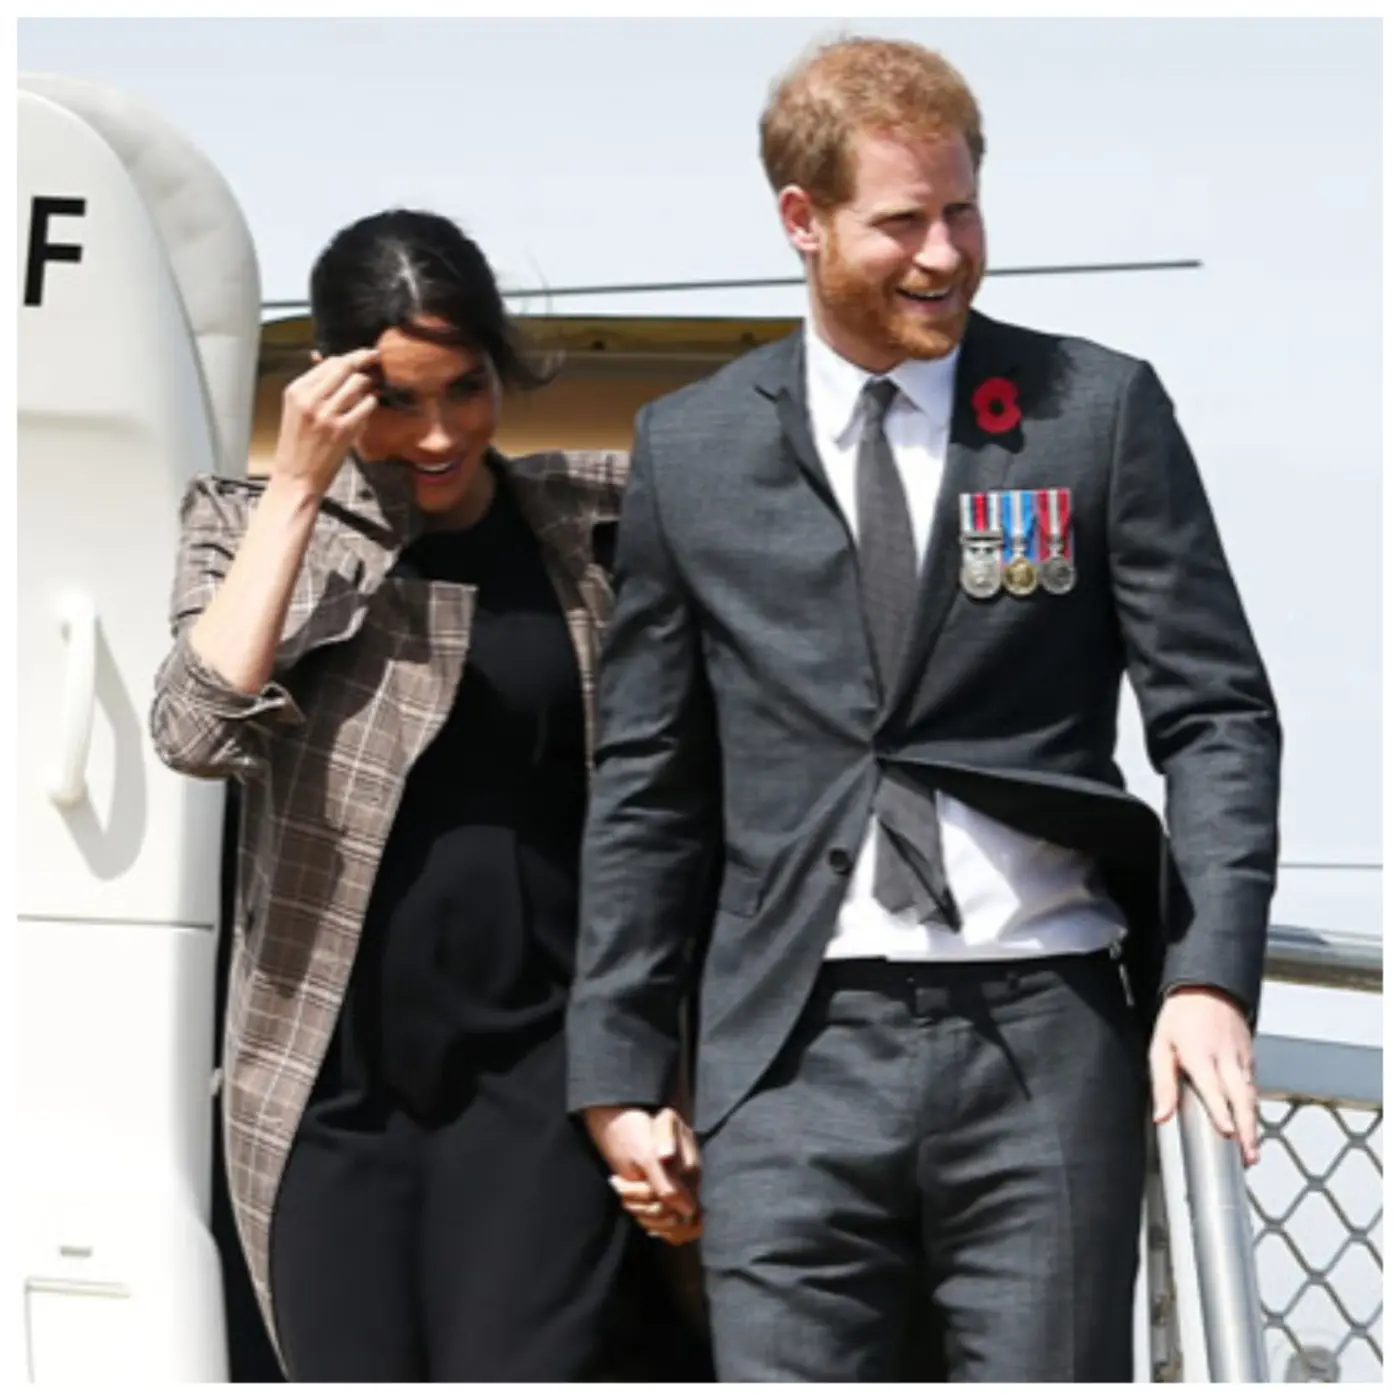 ABUJA, Nigeria (AP) — Prince Harry and his wife Meghan arrived in Nigeria on Friday to champion the Invictus Games, which he founded to aid the rehabilitation of wounded and sick servicemembers and veterans, among them Nigerian soldiers fighting a 14-year war against Islamic extremists. The couple, visiting the West African nation for the first time on the invitation of its military, arrived in the capital, Abuja, early in the morning, according to defense spokesman Brig. Gen. Tukur Gusau. Harry and Meghan will be meeting with wounded soldiers and their families in what Nigerian officials have said is a show of support to improve the soldiers’ morale and wellbeing.